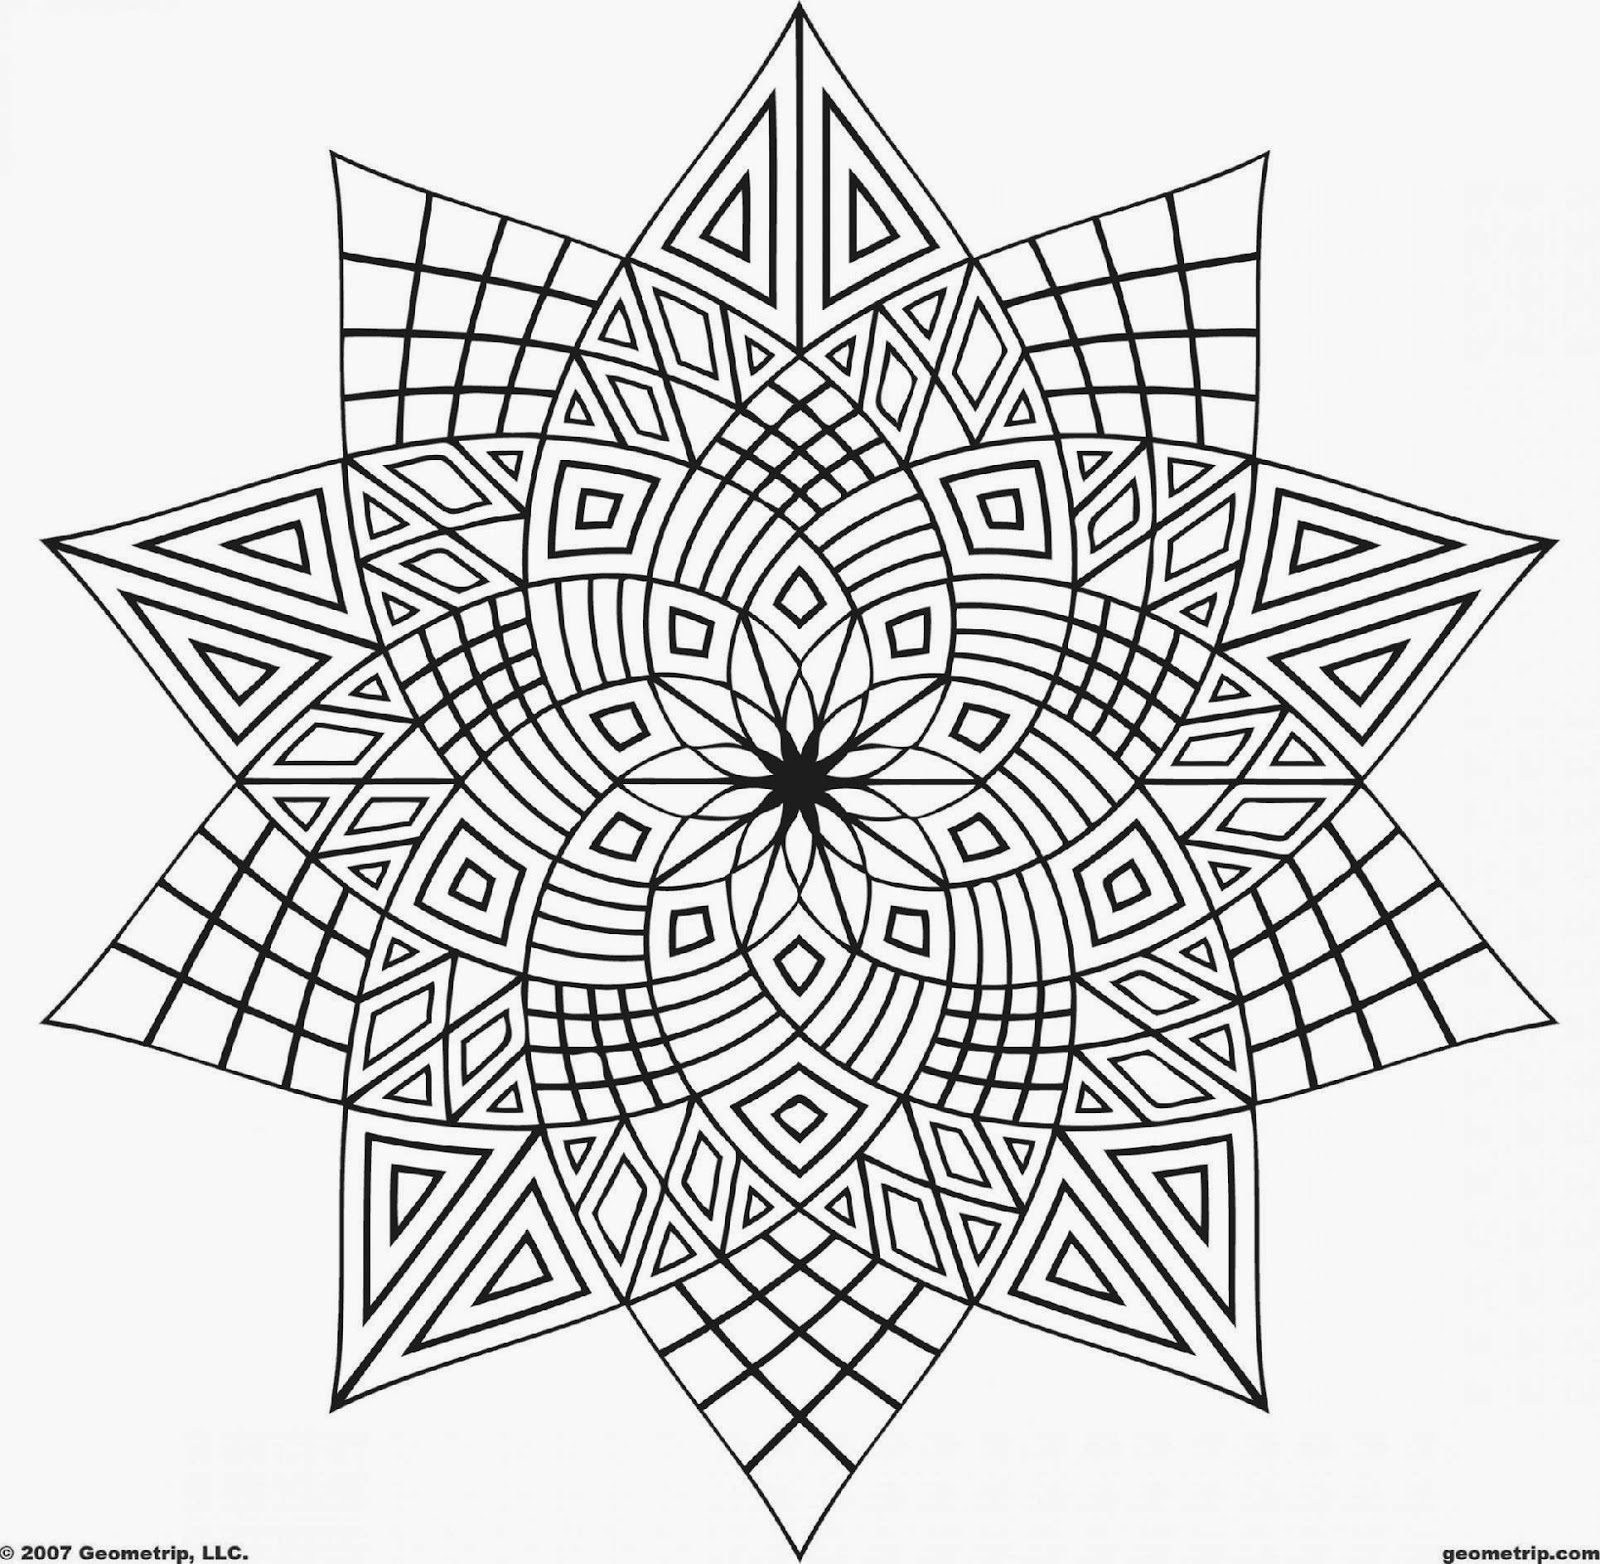 Awesome Coloring Pages Free Coloring Sheet BEDECOR Free Coloring Picture wallpaper give a chance to color on the wall without getting in trouble! Fill the walls of your home or office with stress-relieving [bedroomdecorz.blogspot.com]